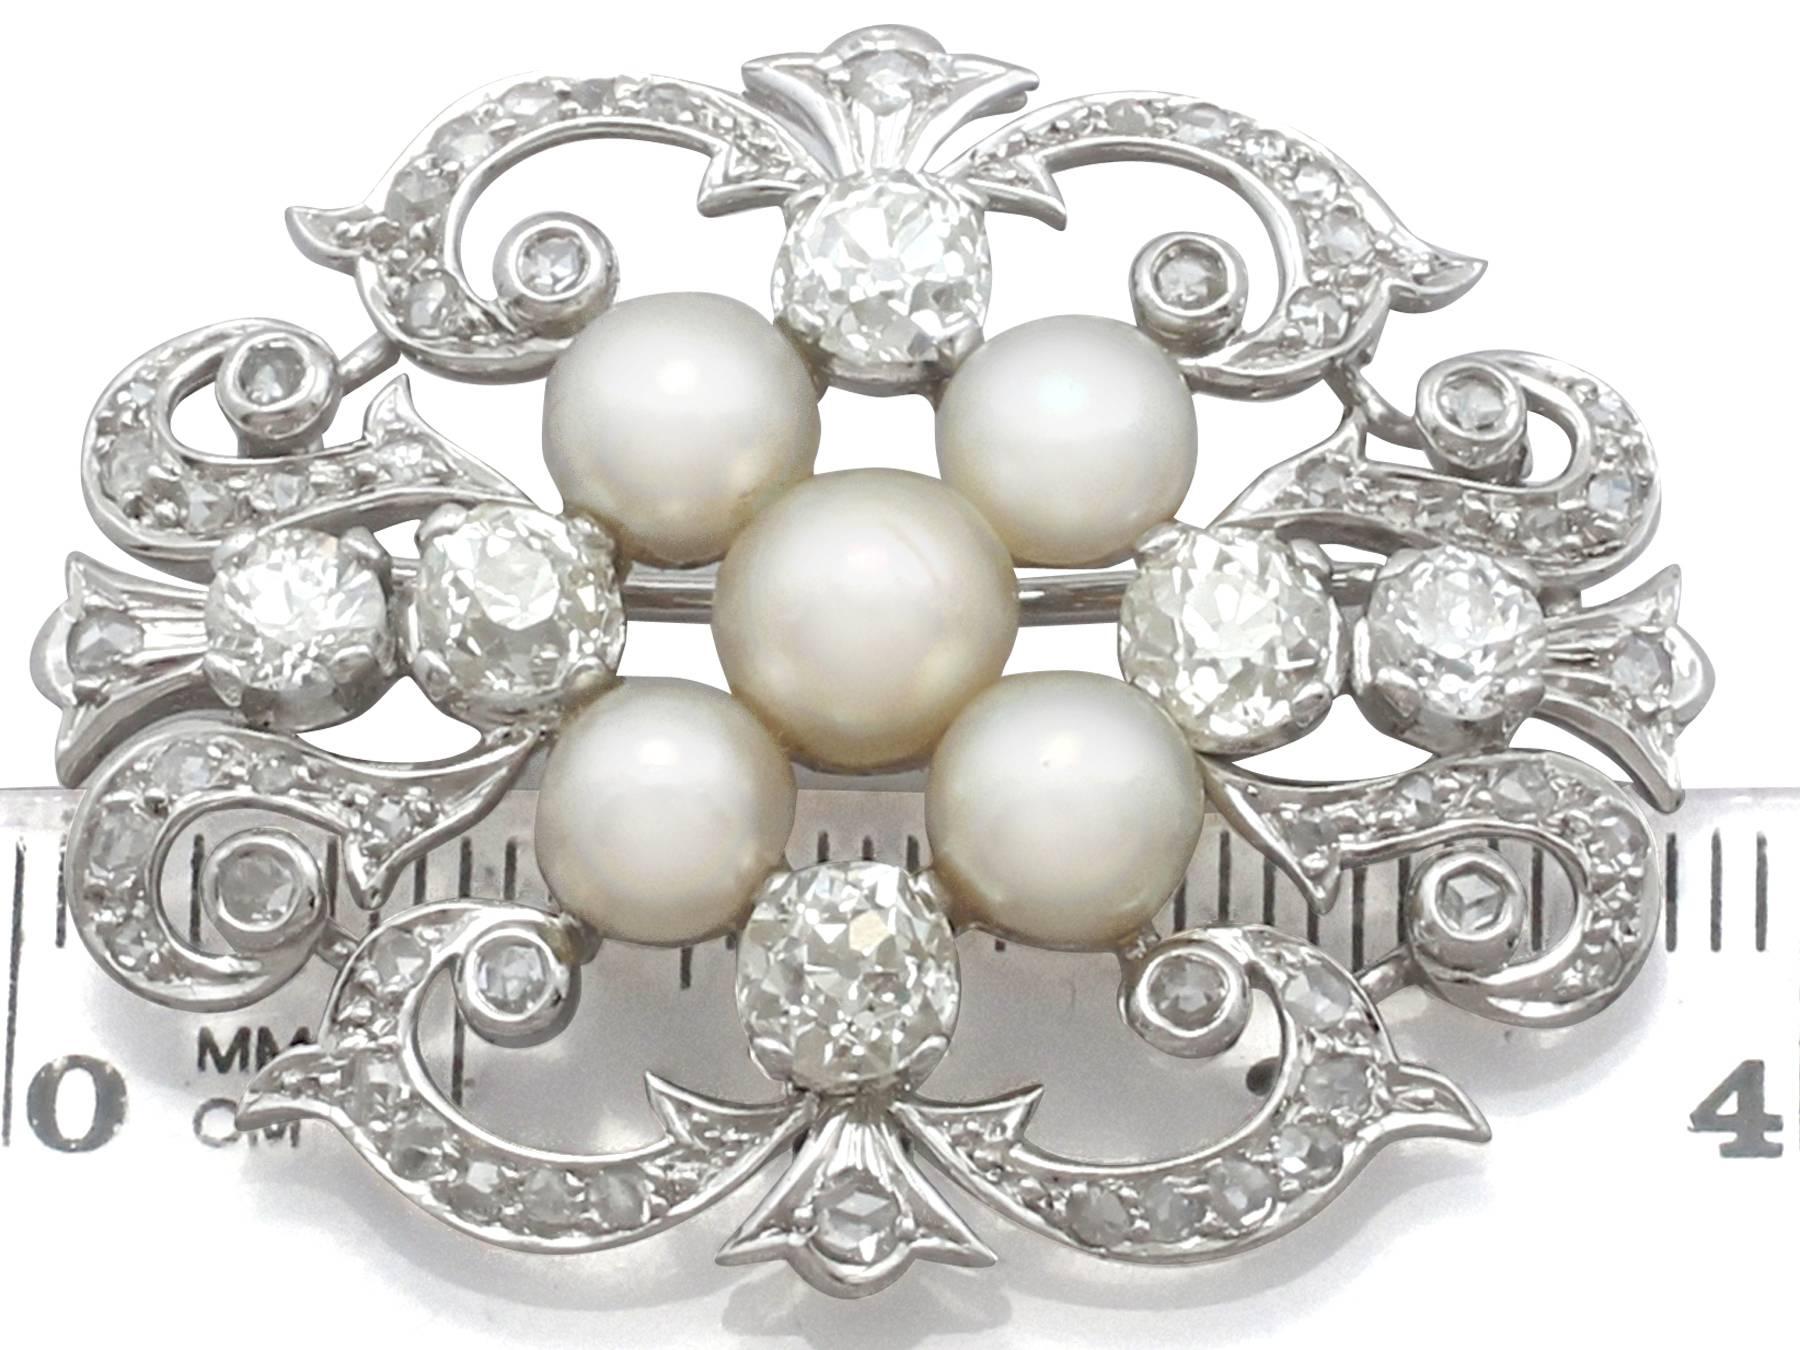 A stunning, fine and impressive 3.65 carat diamond and pearl, 18 karat white gold brooch; part of our antique jewelry and estate jewelry collections

This stunning antique pearl brooch has been crafted in 18k white gold.

The brooch is ornamented